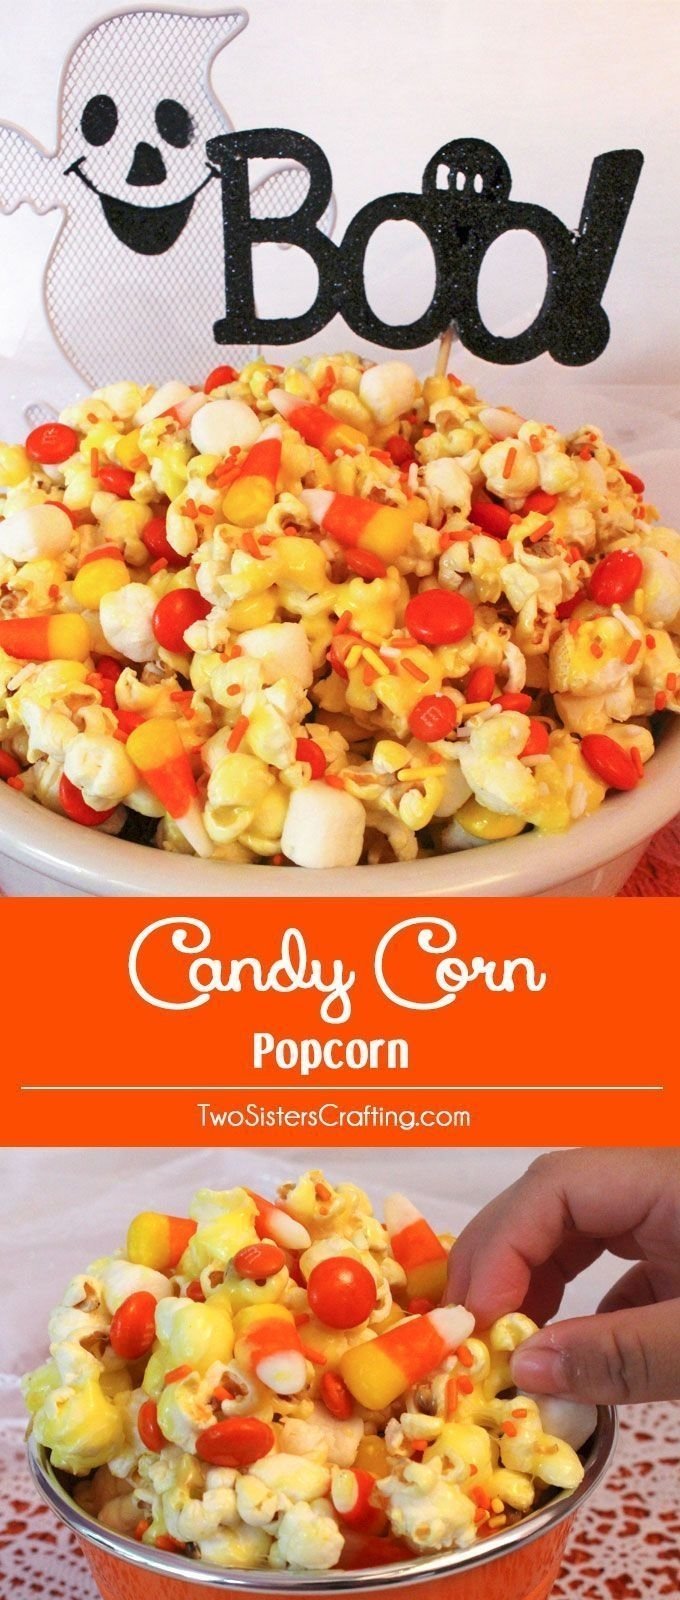 10 Unique Halloween Food Ideas For Adults Easy candy corn popcorn a fun halloween treat sweet salty crunchy 2022